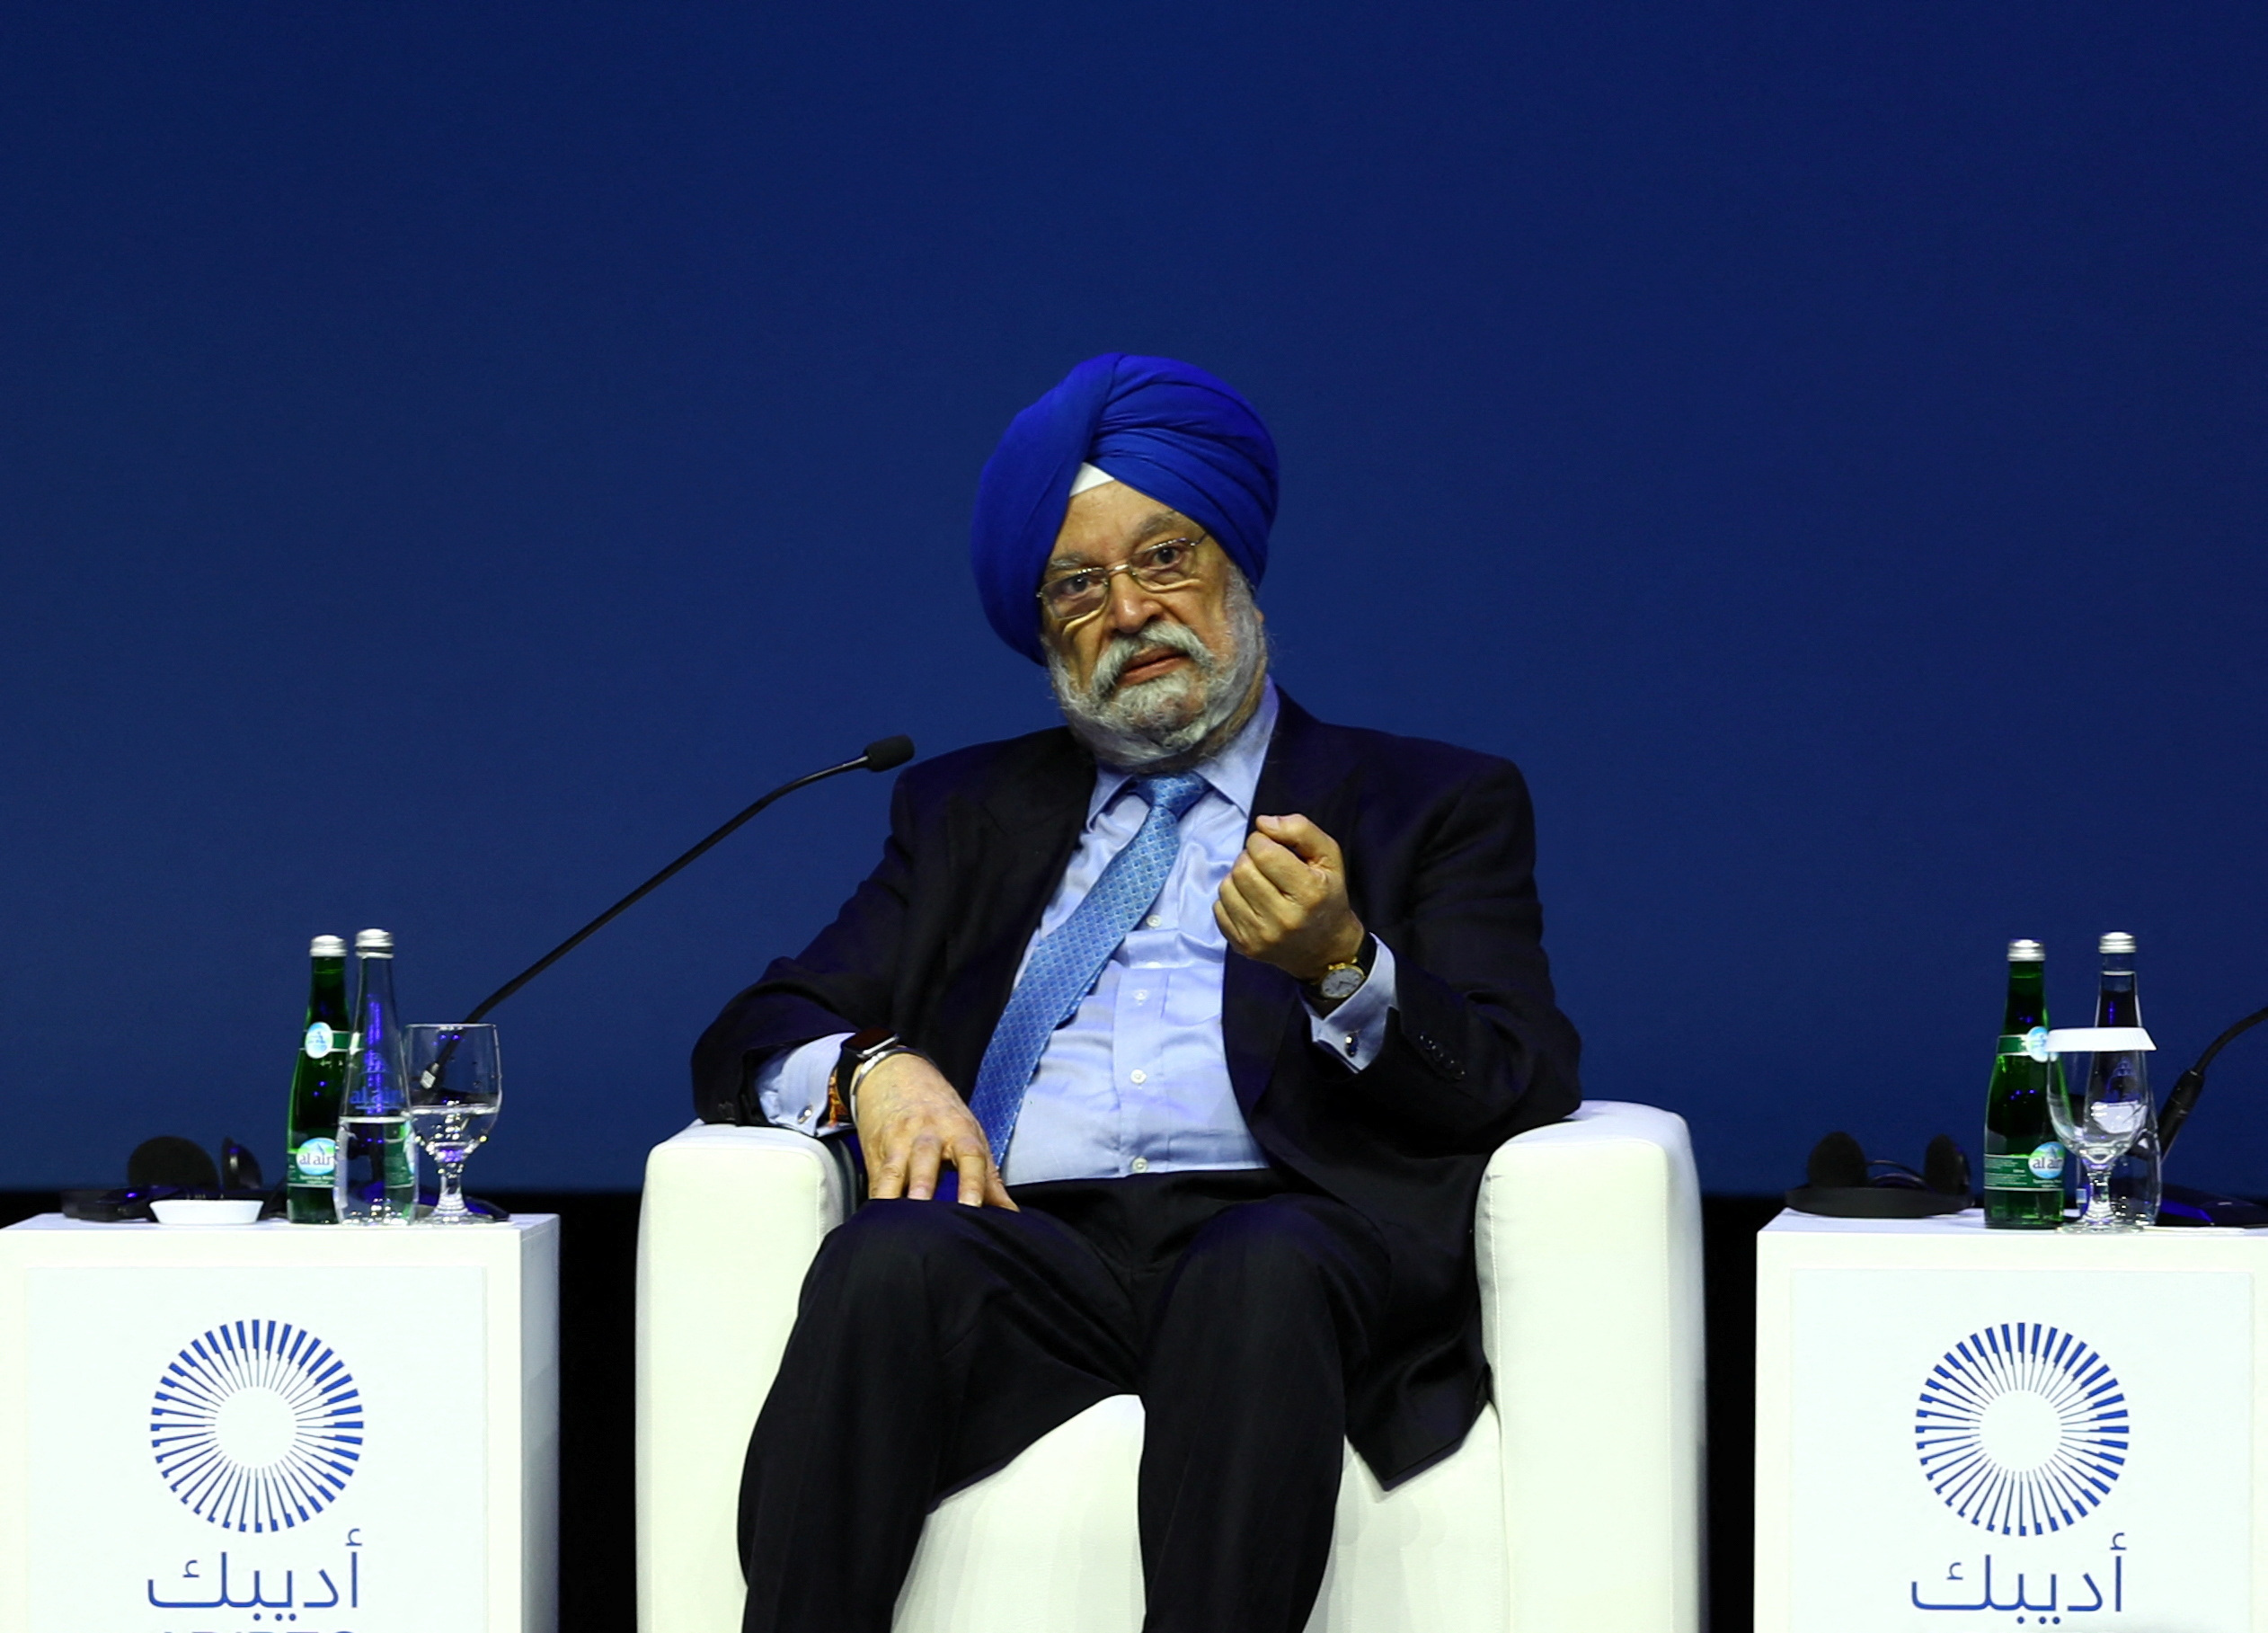 India's Minister of Petroleum and Natural Gas Hardeep Singh Puri speaks during the Abu Dhabi International Petroleum Exhibition and Conference (ADIPEC) in Abu Dhabi